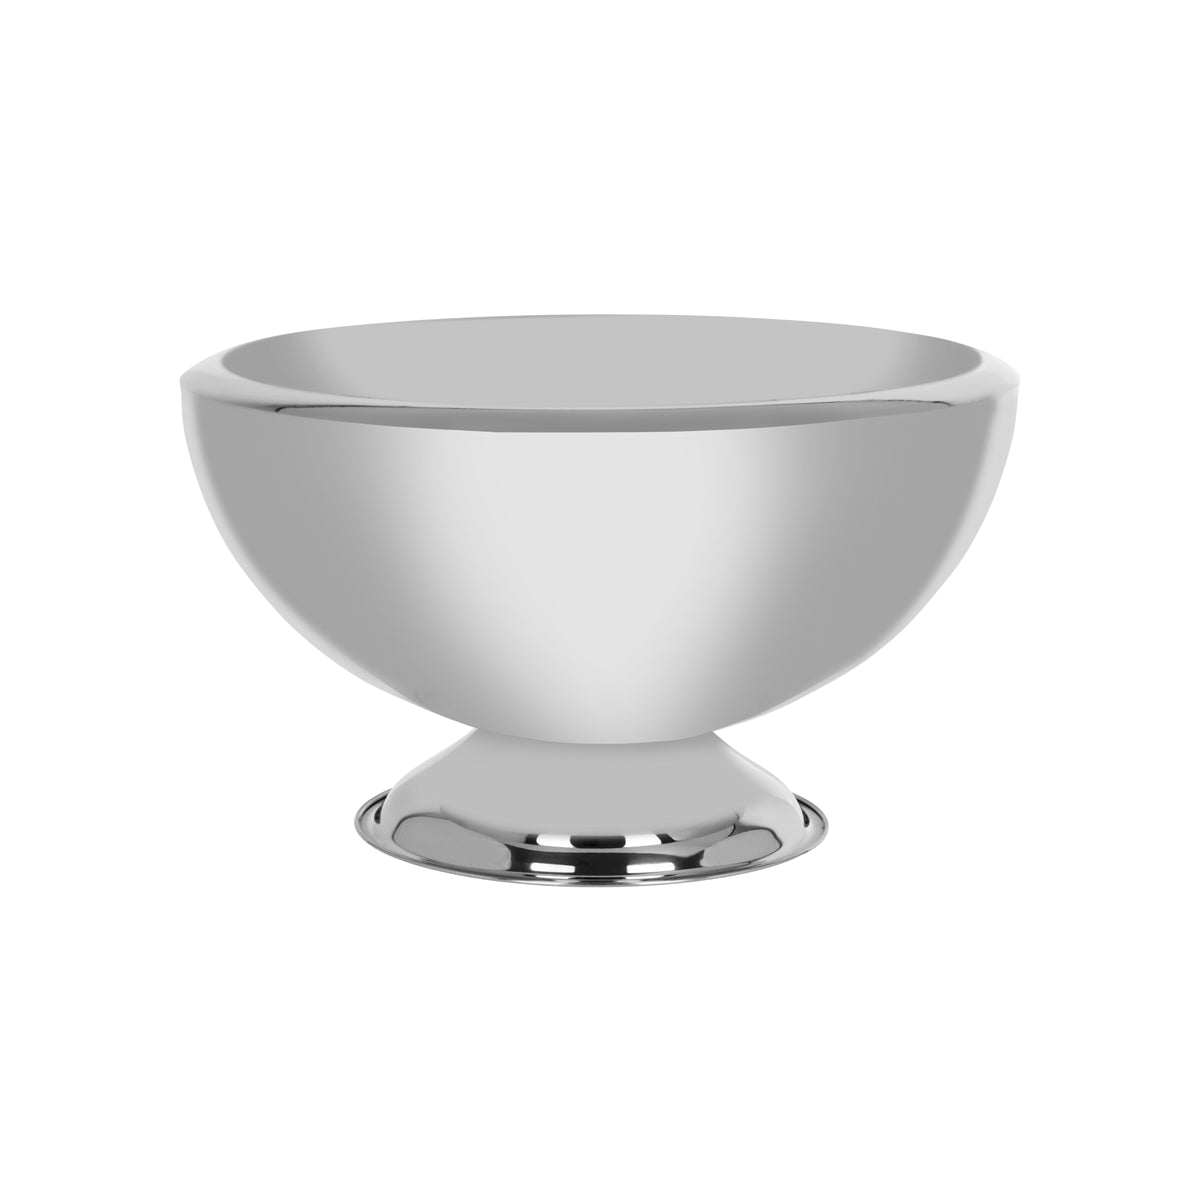 71673 Chef Inox Chef Inox Punch Bowl Double Wall Footed Tomkin Australia Hospitality Supplies